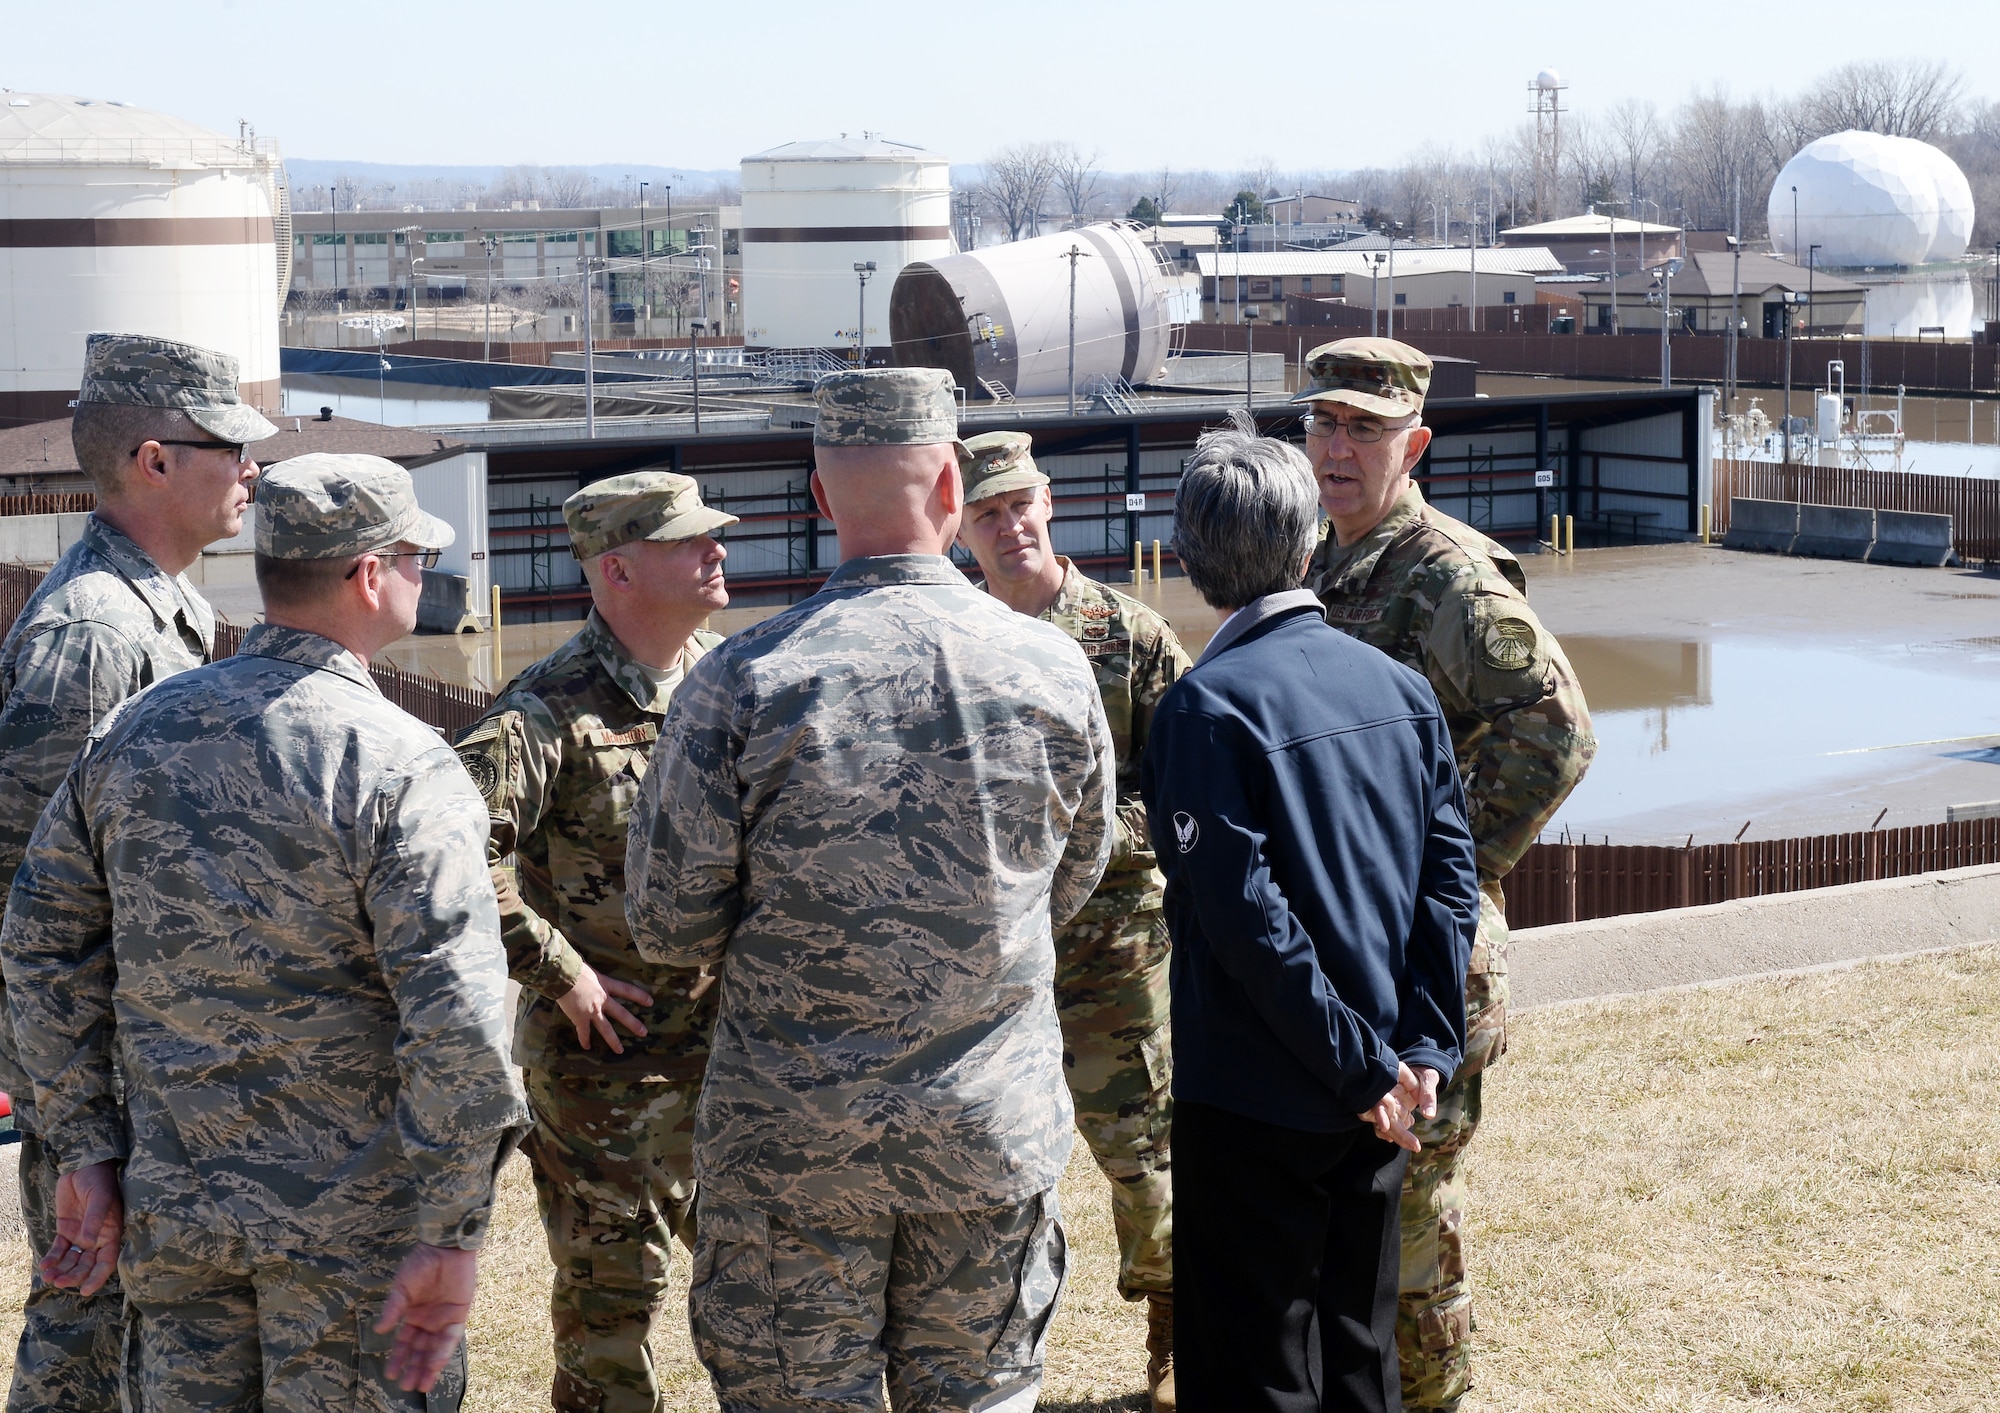 U.S. Strategic Command Commander Gen. John Hyten talks with Secretary of the Air Force Heather Wilson March 22, 2019, on Offutt Air Force Base, Neb. A week earlier the base began taking on flood waters that eventually covered one-third of the installation. (U.S. Air Force photo by Charles Haymond)